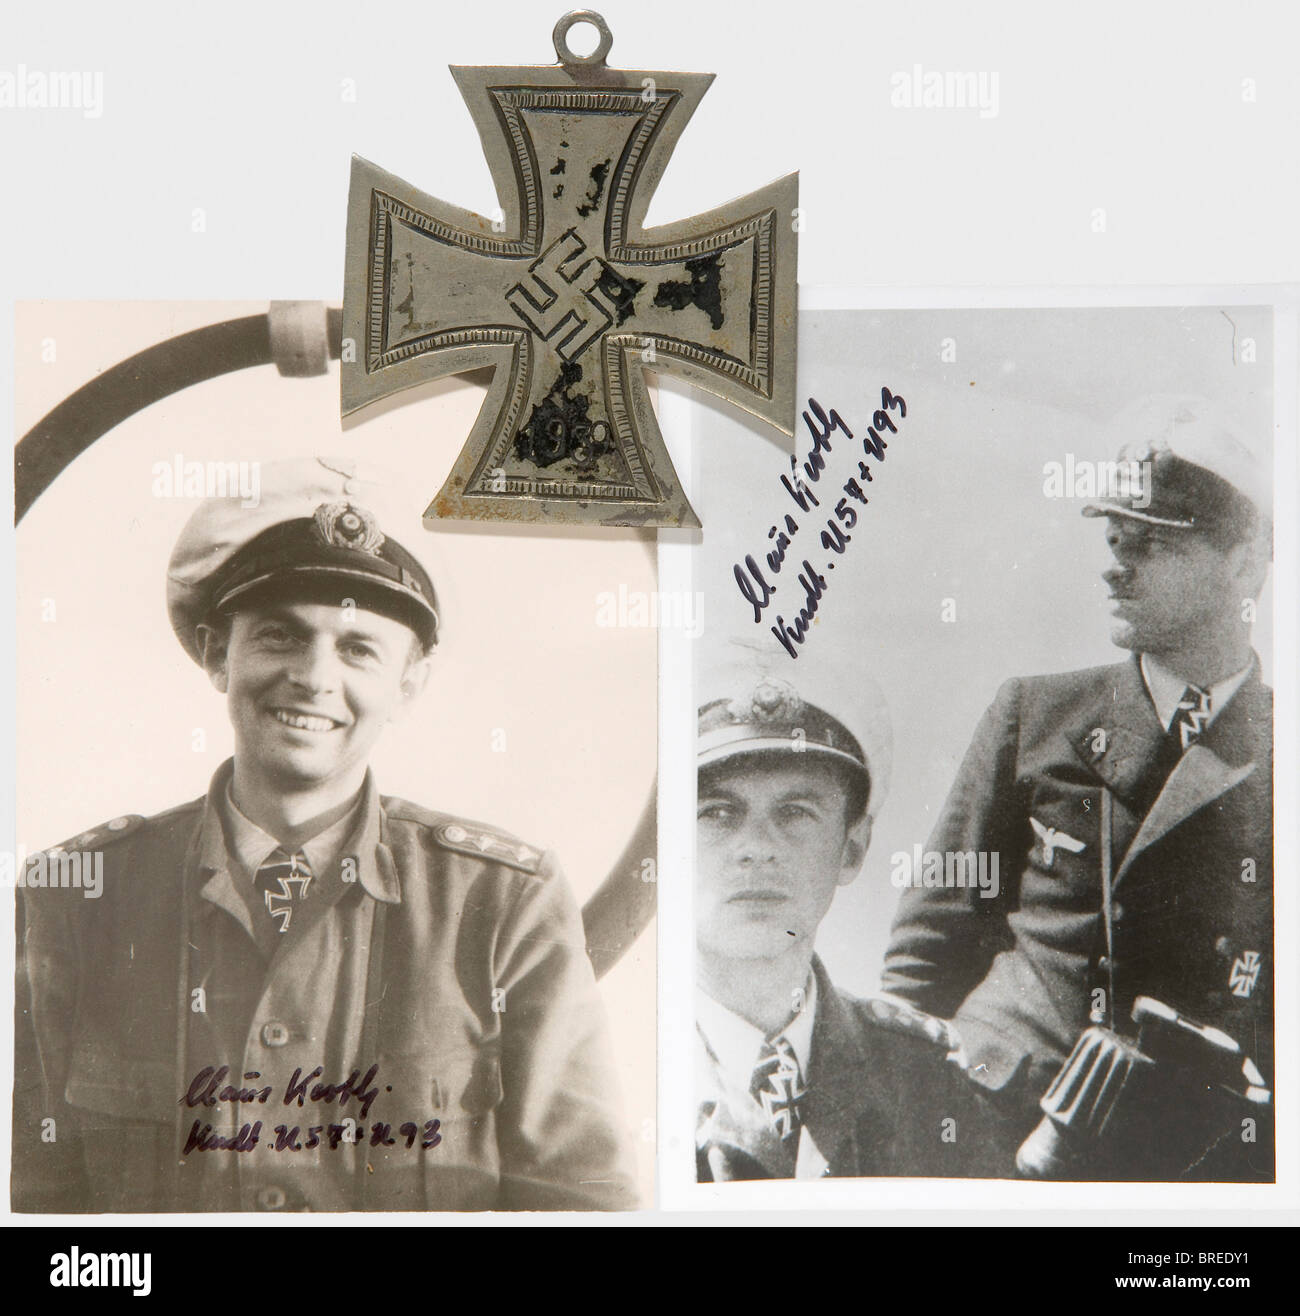 Kapitänleutnant Claus Korth (1911 - 1988), a Knight's Cross of the Iron Cross of 1939, front production On-board rendition of the Knight's Cross of the Iron Cross from the estate of Kapitänleutnant (Lt. Commander) Claus Korth as C.O. of U-93. One-piece white non-ferrous sheet metal cross with soldered eyelet, engraved frame and swastika, remnants of black lacquer. 64 x 71 mm. This decoration was made out of on-board materials during U-93's cruise from 3 May - 10 June 1941 on the 29 May 1941 award of the Knight's Cross to Korth. After the arrival of the official, Stock Photo